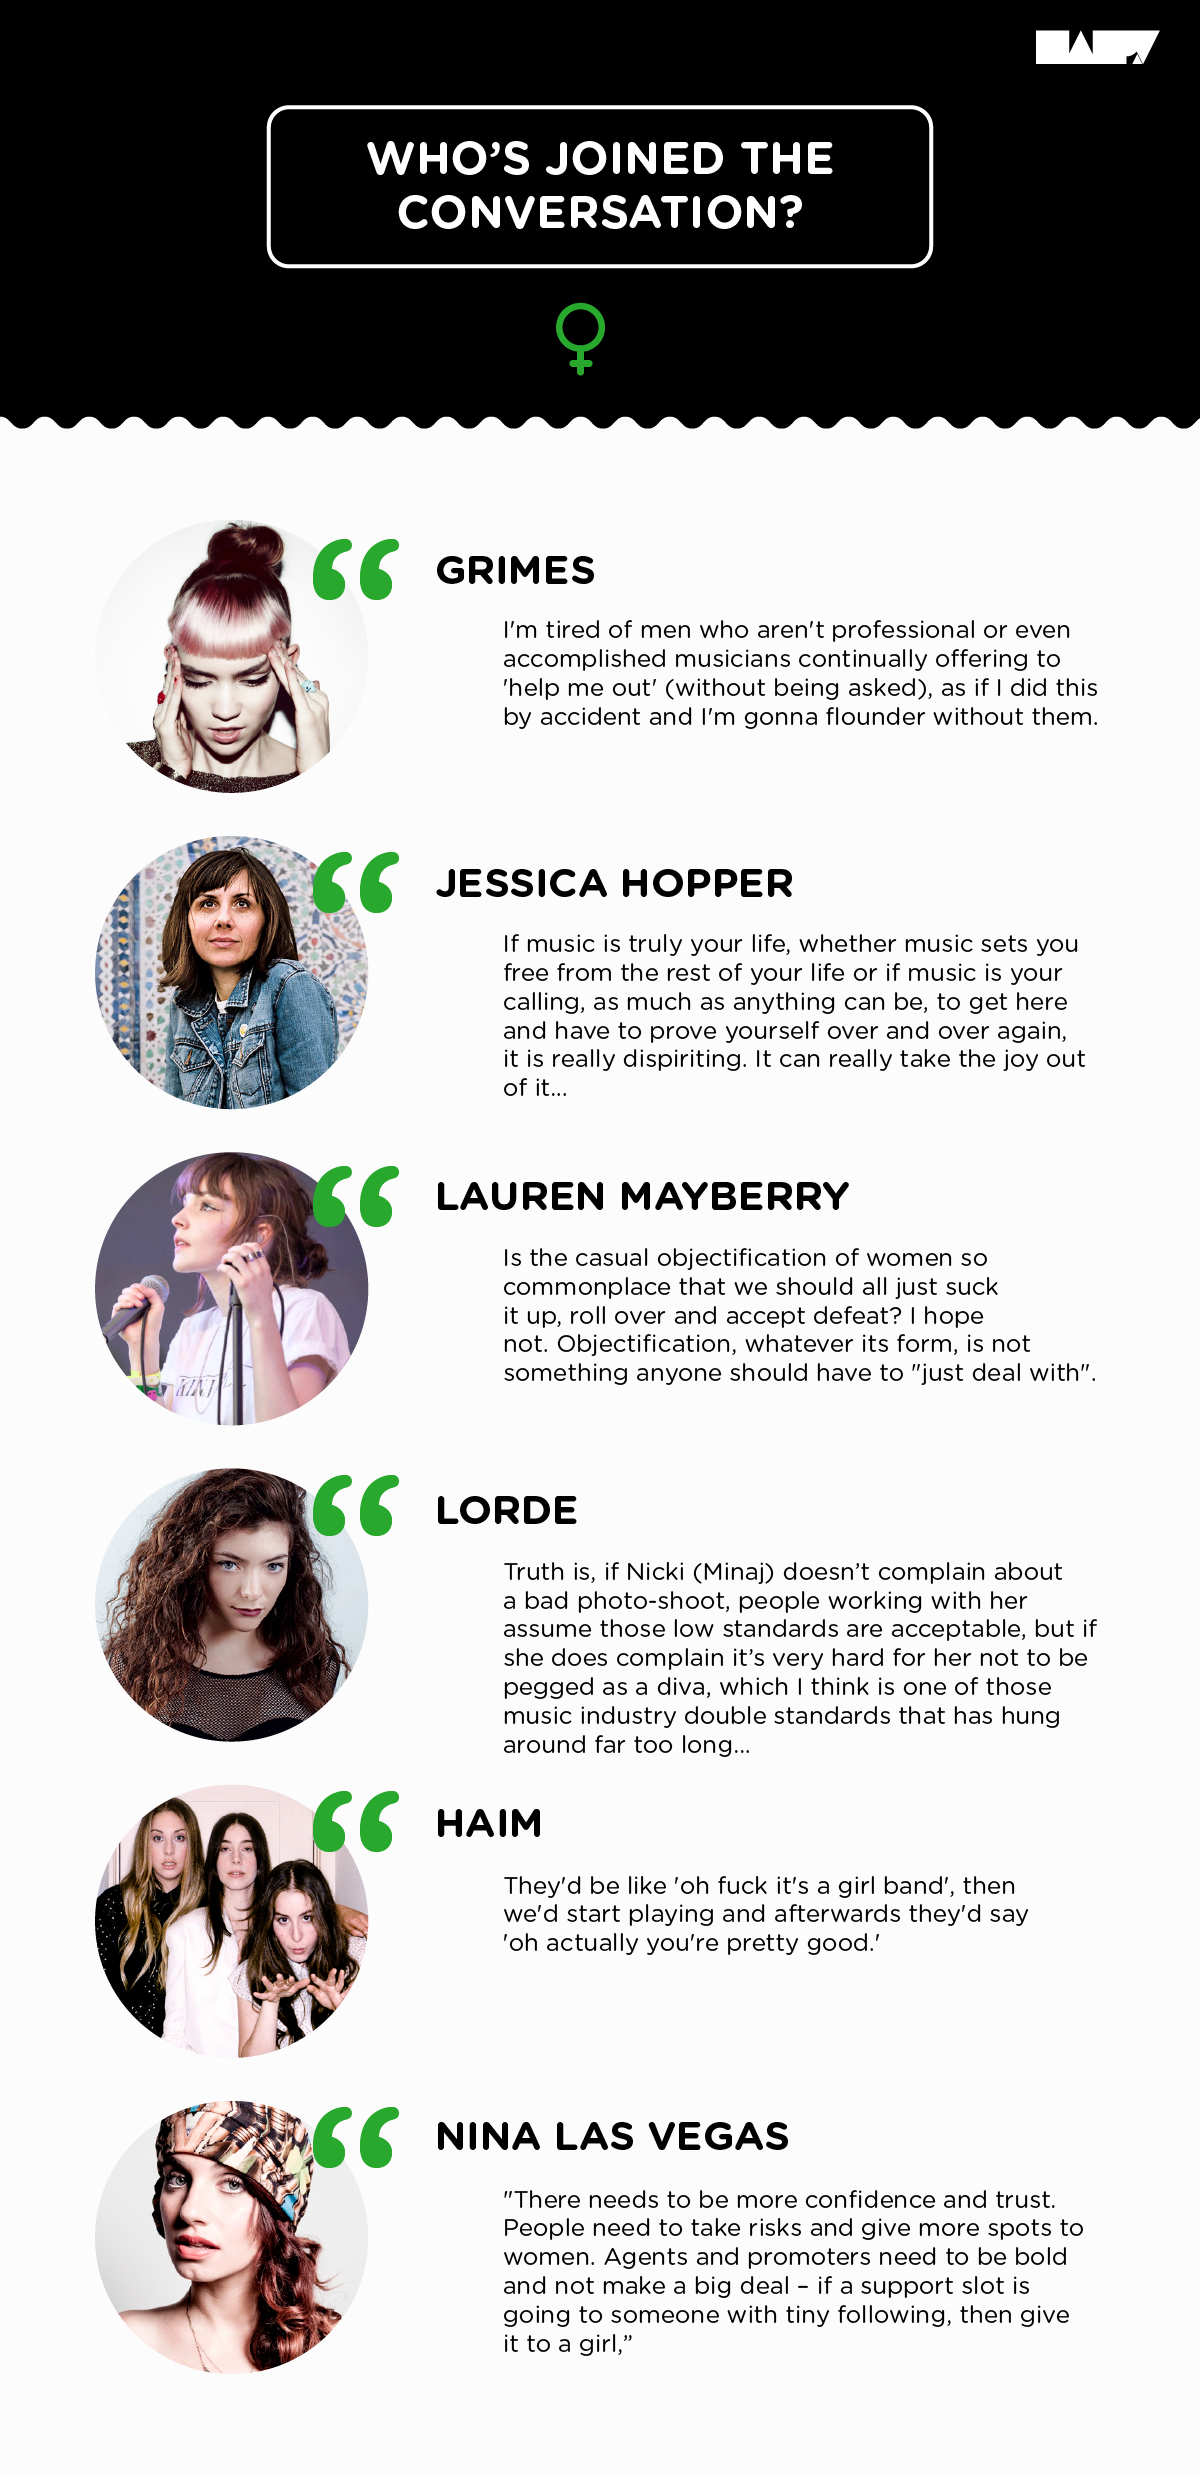 sexism in music infographic the conversation so far